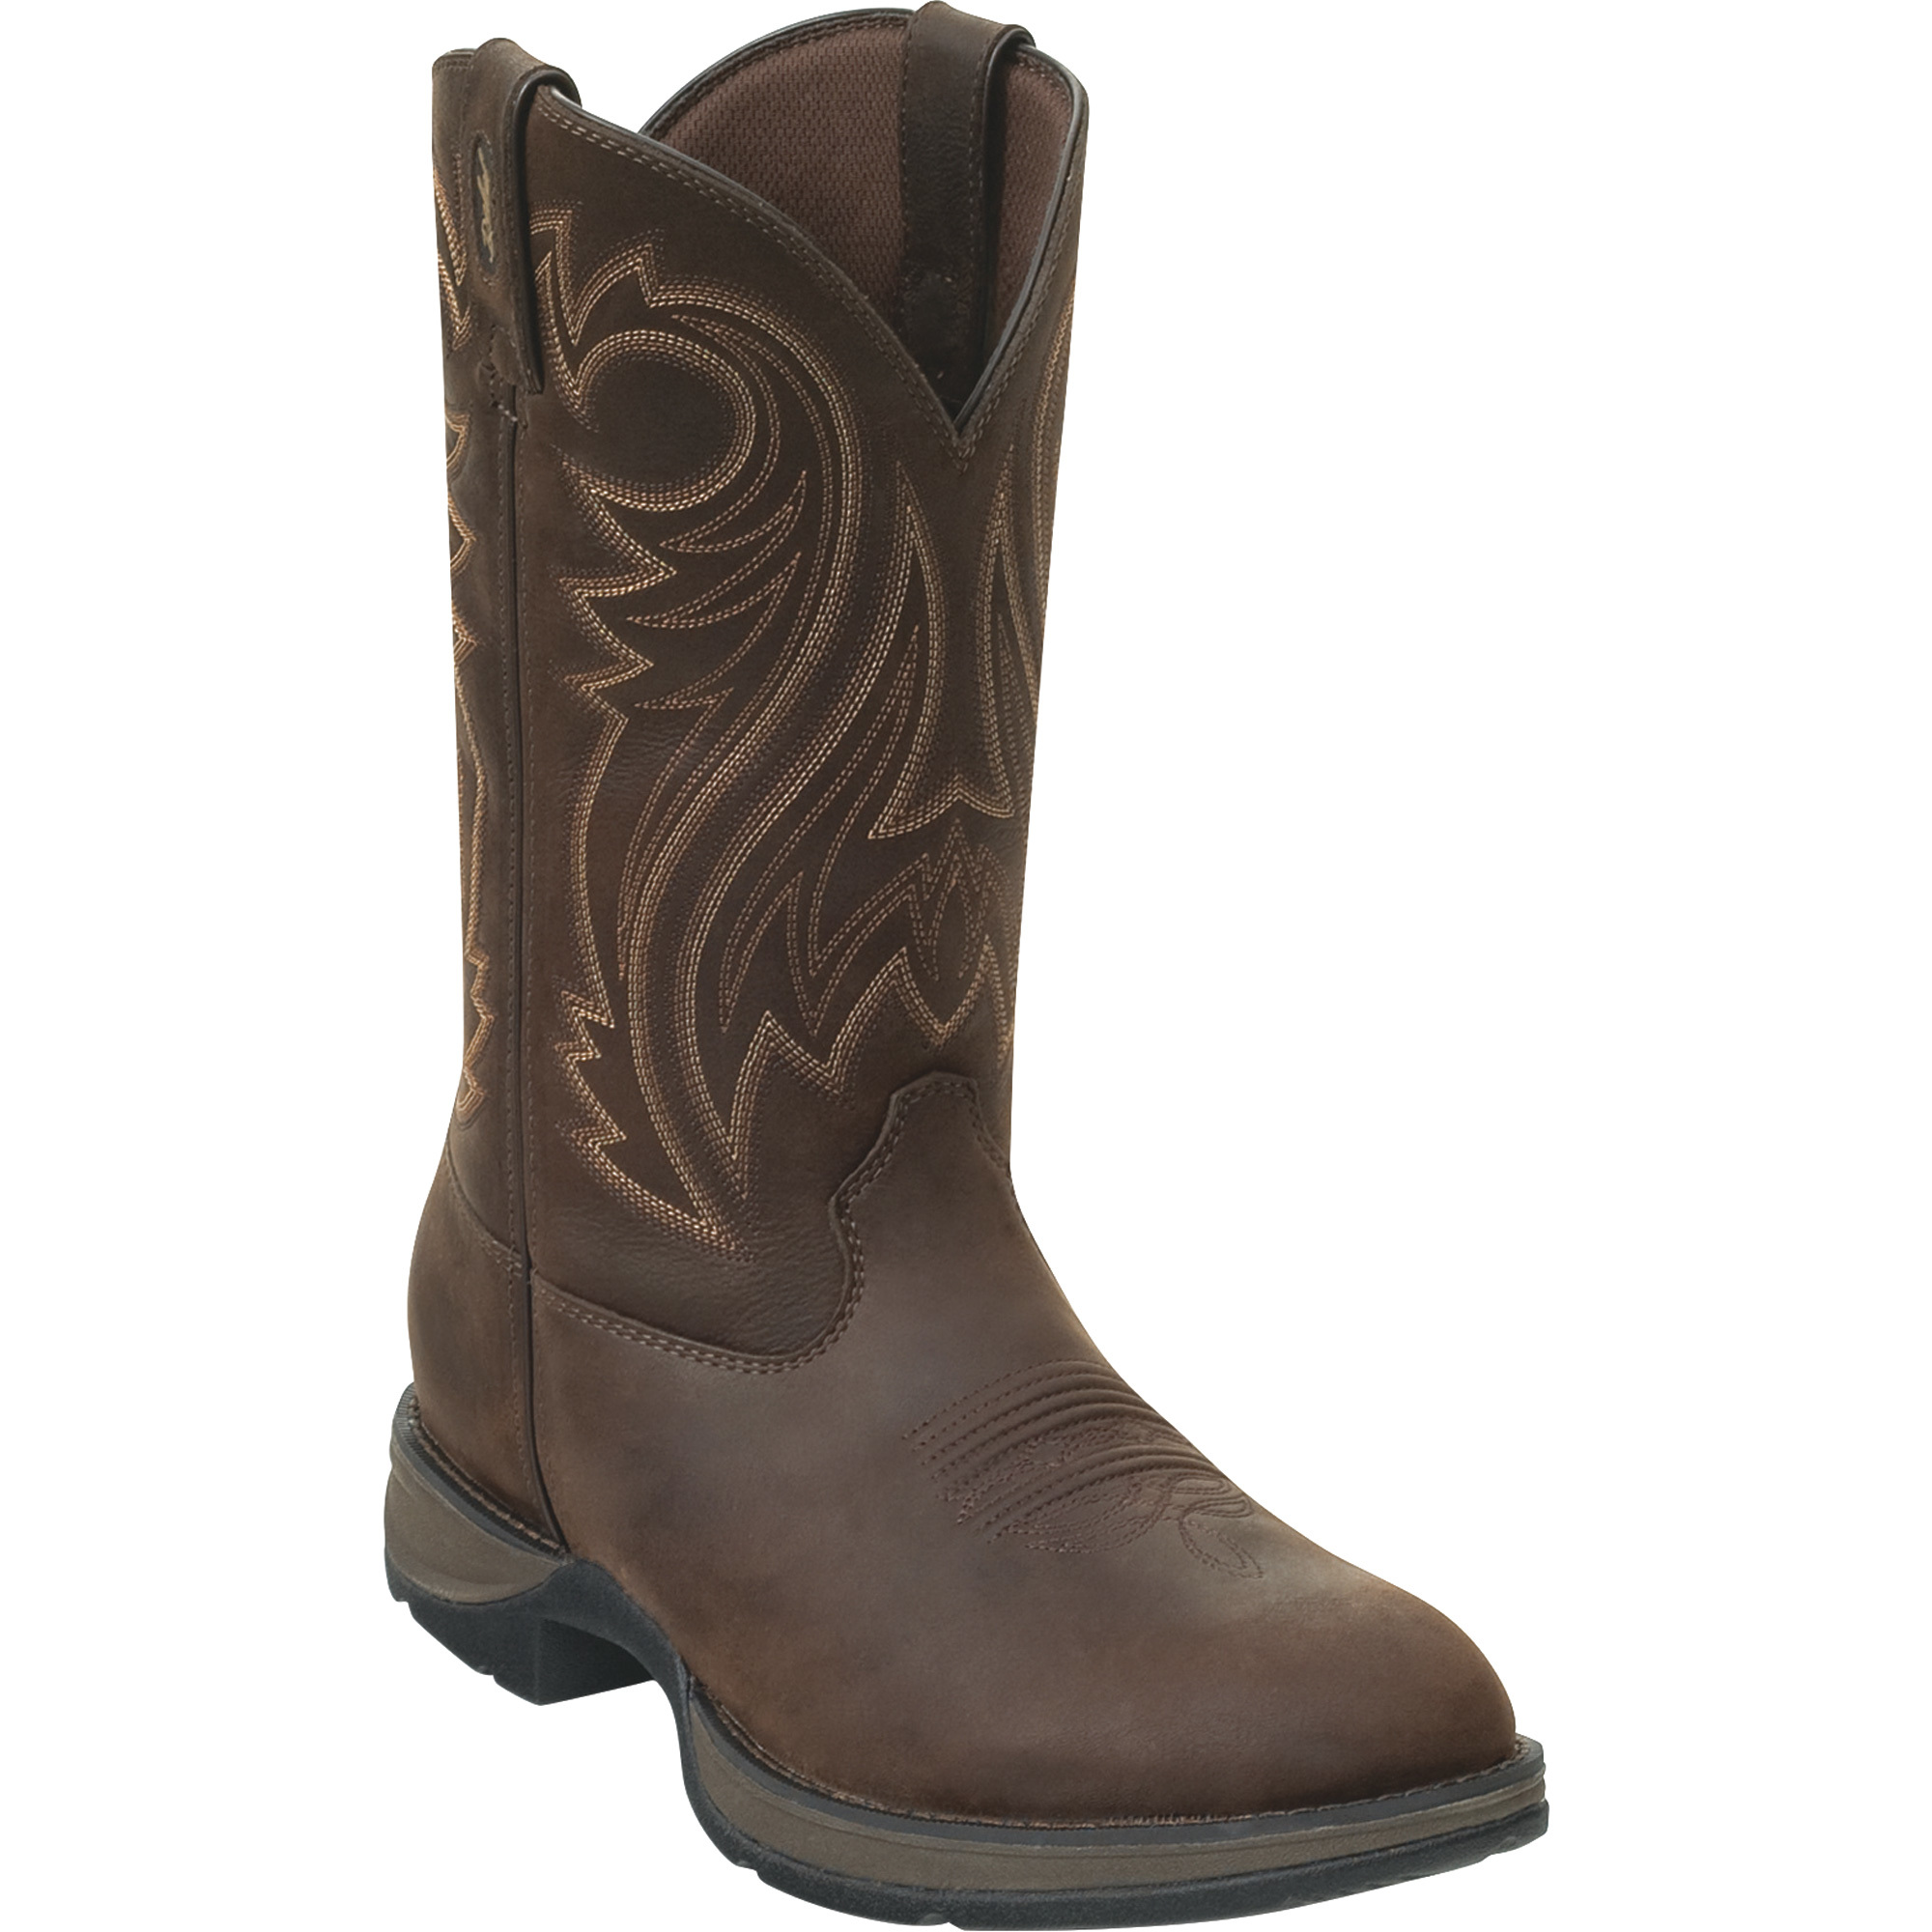 Durango Men's Rebel 12Inch Pull-On Western Work Boots - Chocolate, Size 11 1/2, Model DB 5464